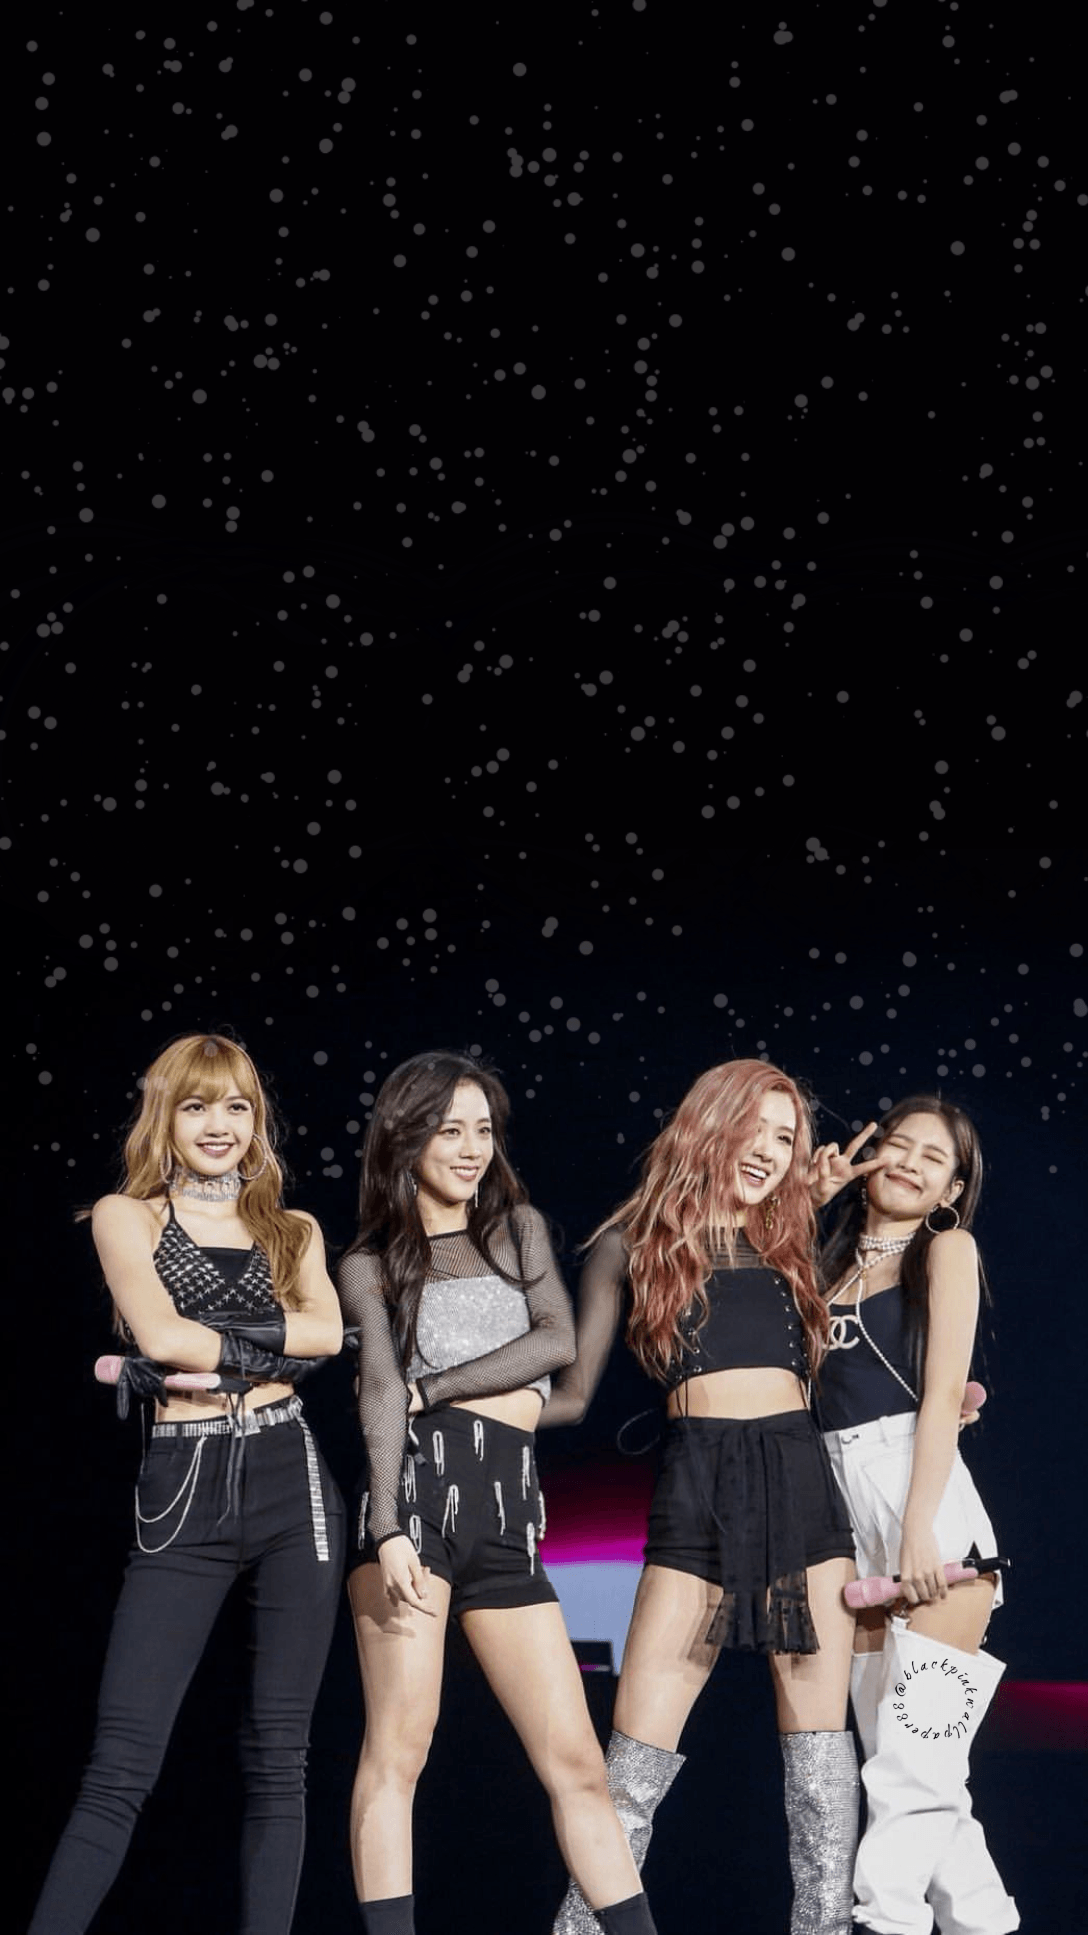 Blackpink Wallpaper 2020 / Blackpink Wallpaper For Android 2021 Android